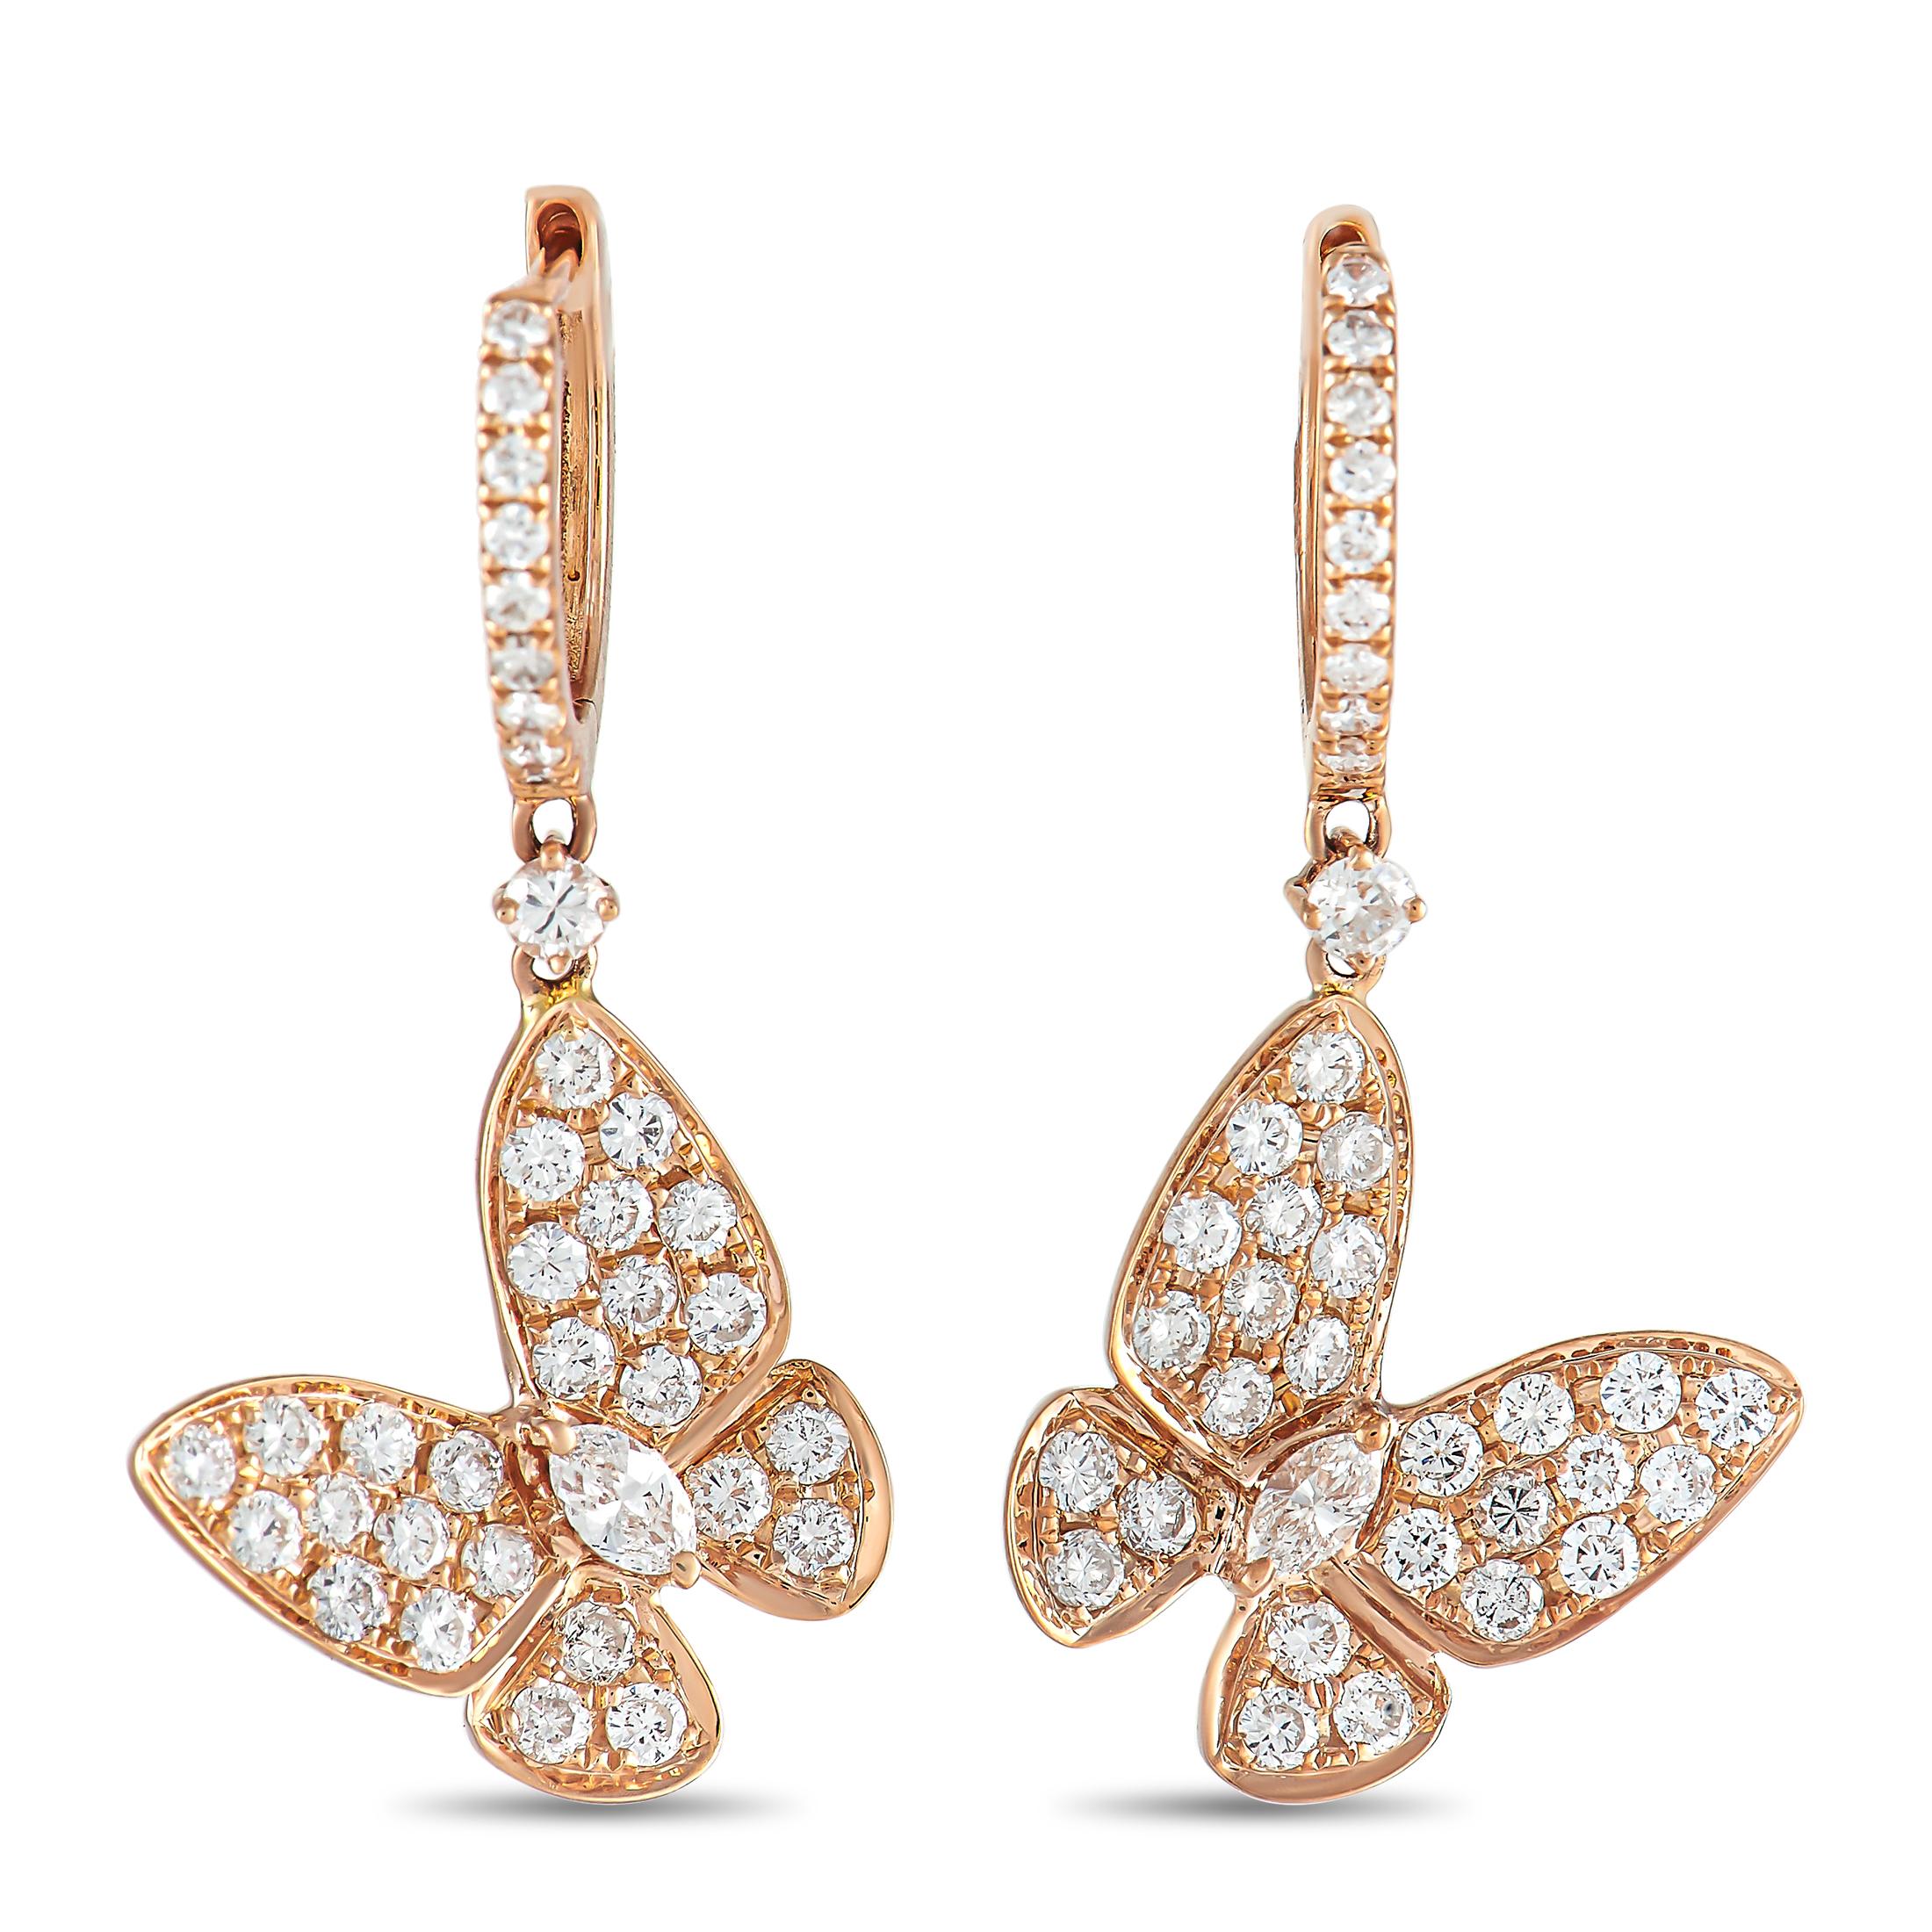 These charming earrings possess a delightful sense of movement. Crafted from 18K Rose Gold, each small hoop features a dangling butterfly motif that will gracefully accompany your every movement. Each earring measures 1.25” long and 0.65” wide -